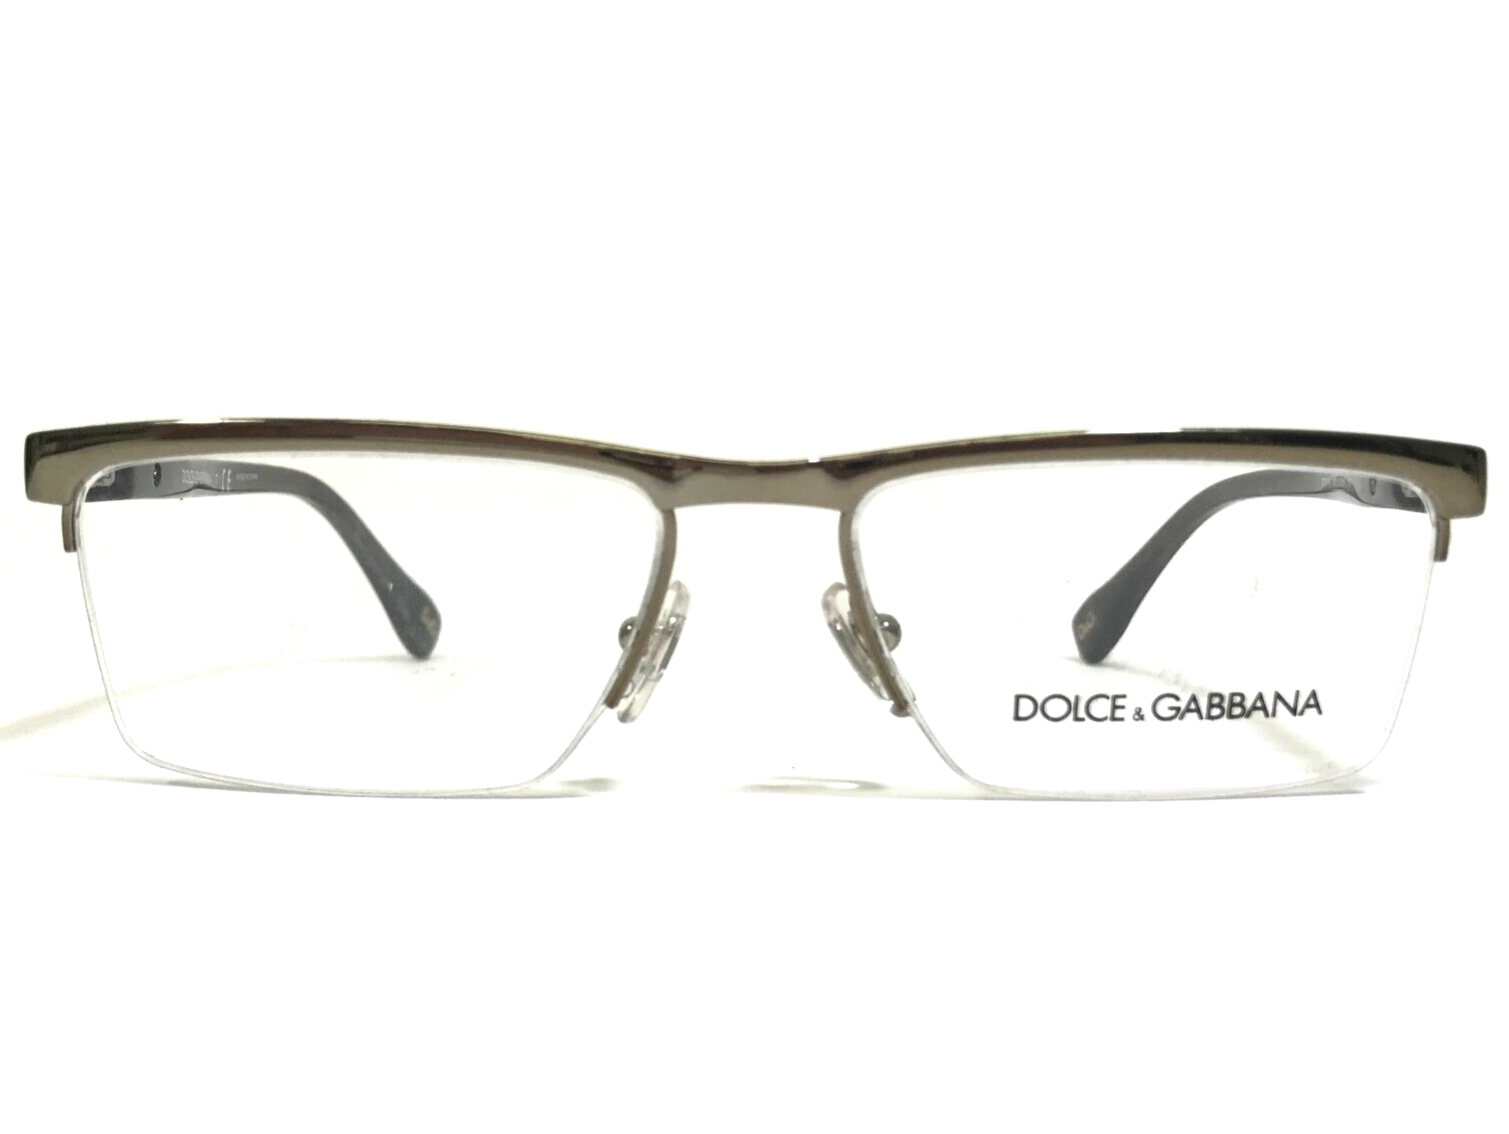 Primary image for Dolce & Gabbana Eyeglasses Frames DD5104 1071 Gray Marble Silver 52-16-135